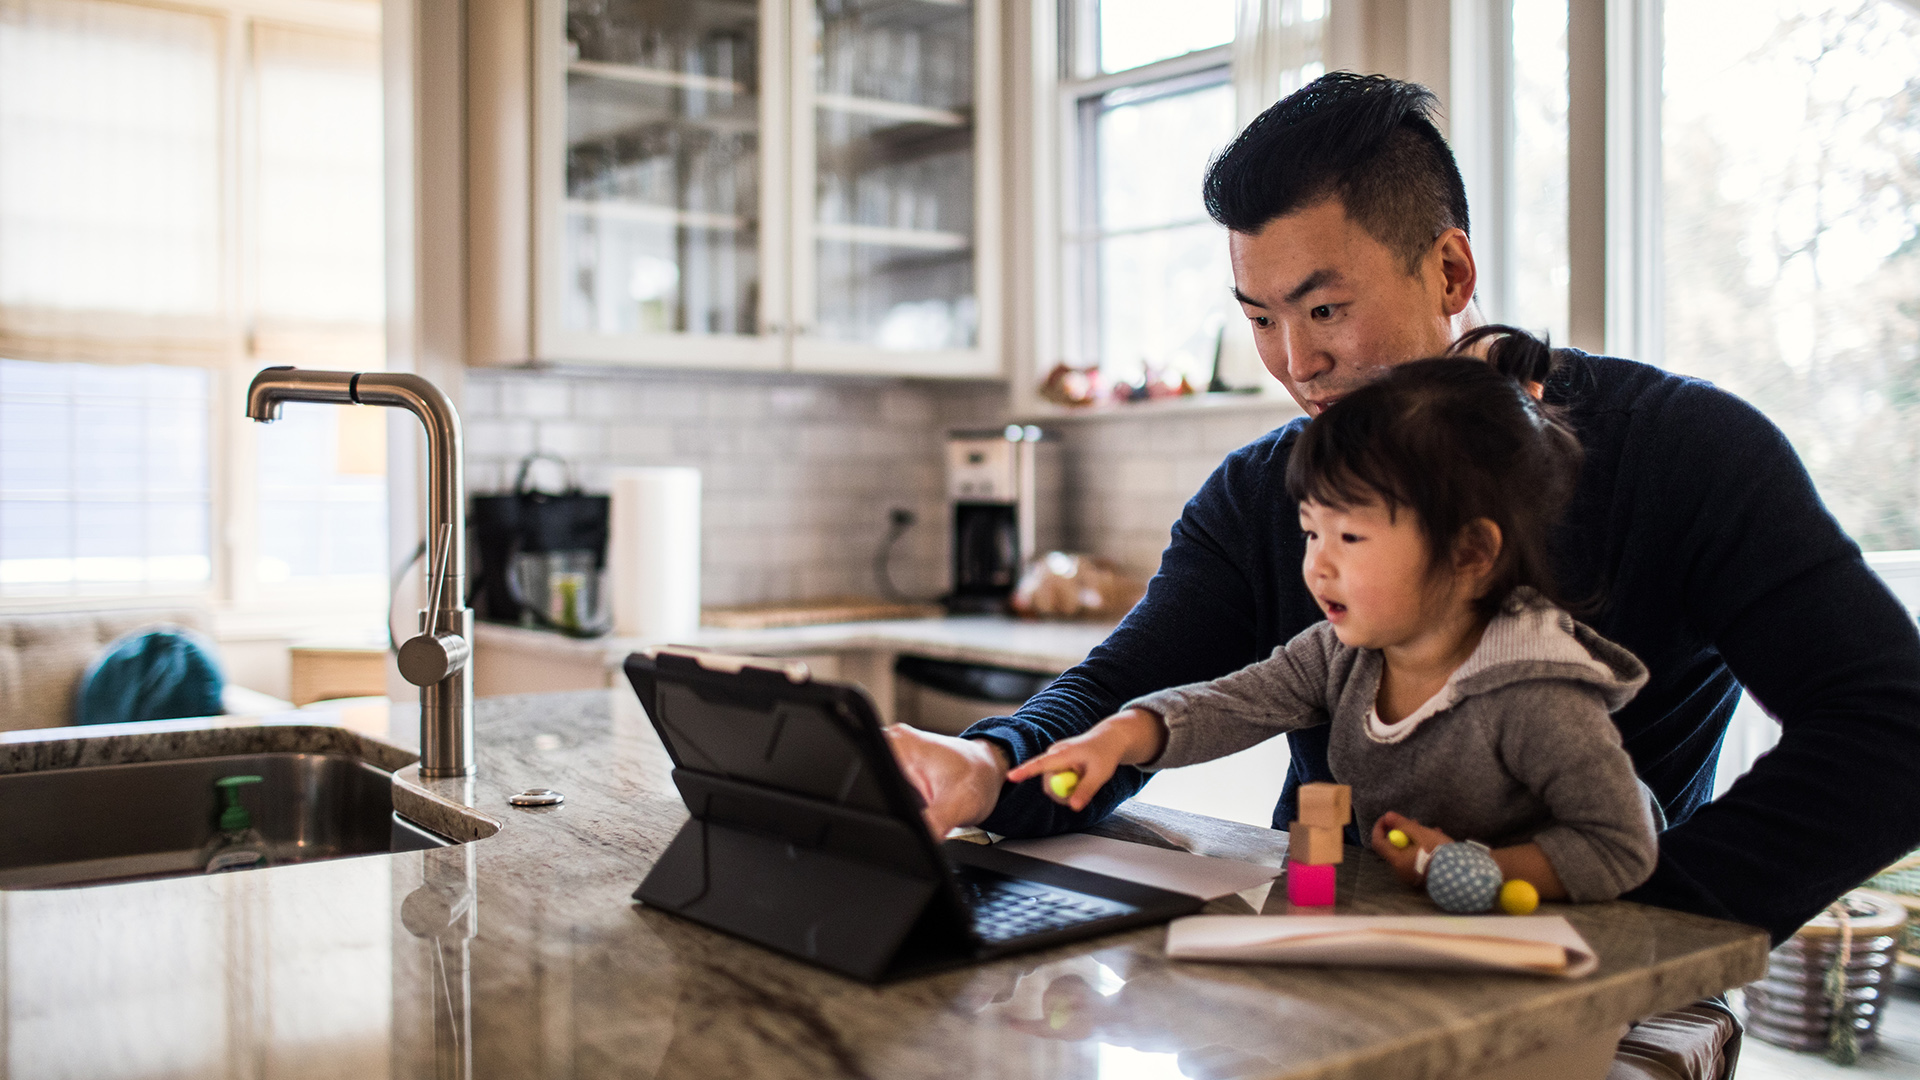 Father and child using tablet together in kitchen